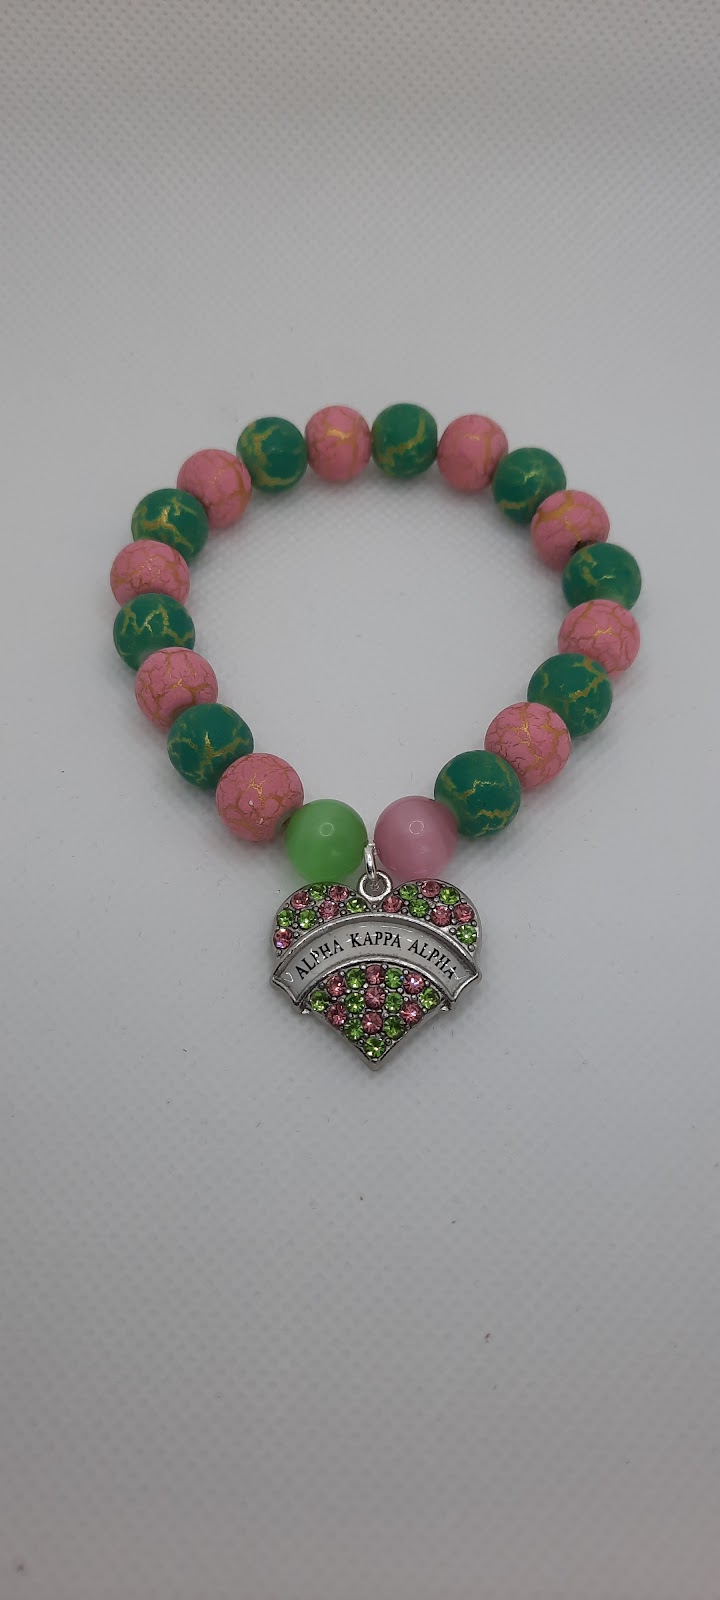 Lady D Beads and More | 1439 Old Salem Rd SE Suite i-7, Conyers, GA 30013, USA | Phone: (678) 532-7789